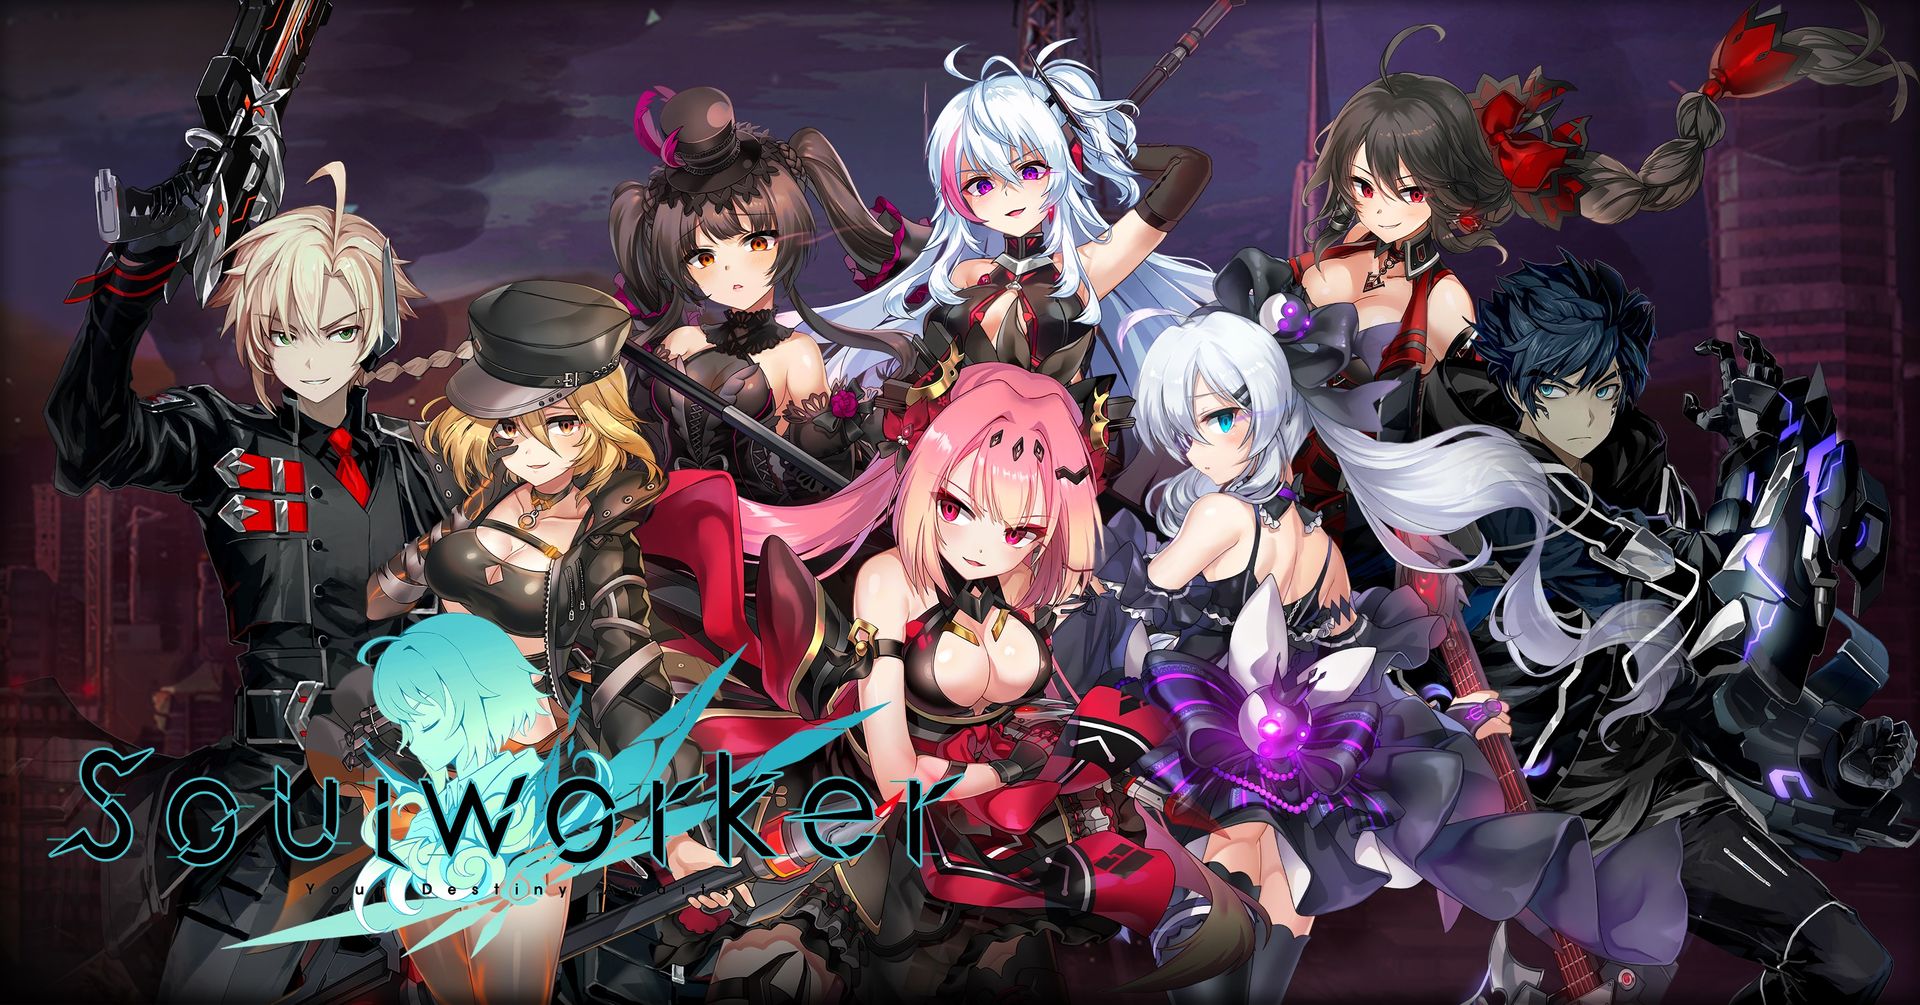 Soulworker anime action mmo стим фото 13